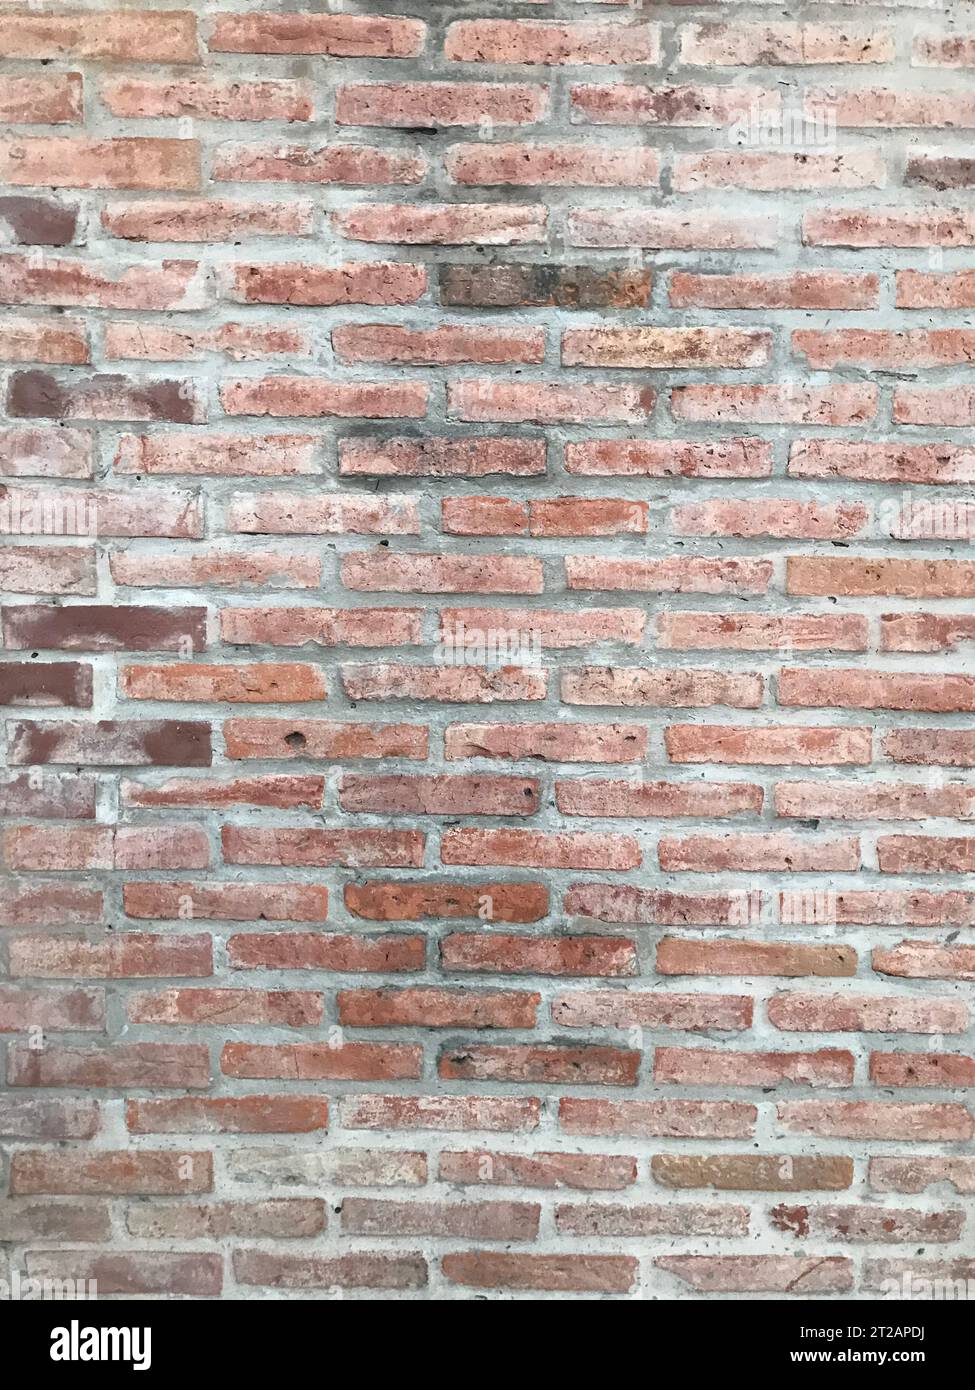 Background of an exposed brick wall Stock Photo